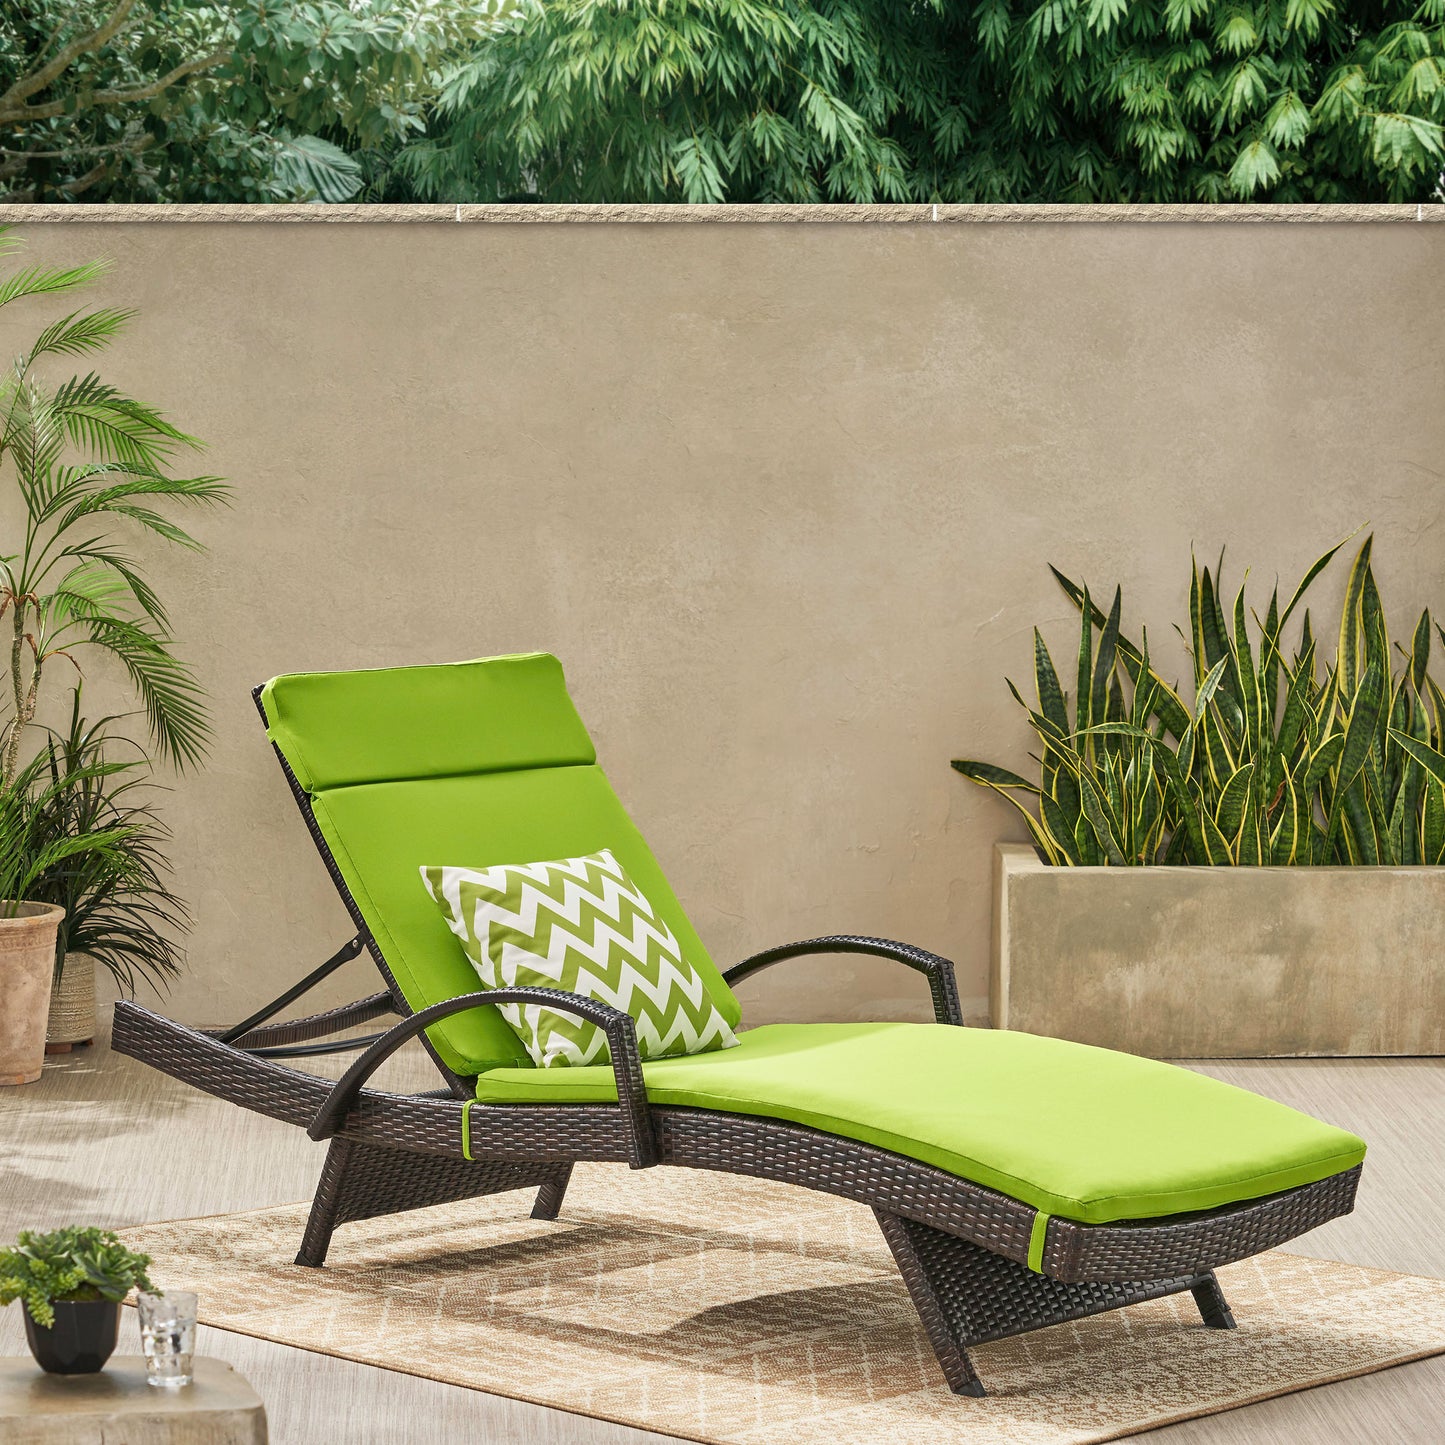 Lakeport Outdoor Adjustable Armed Chaise Lounge Chair w/ Cushion